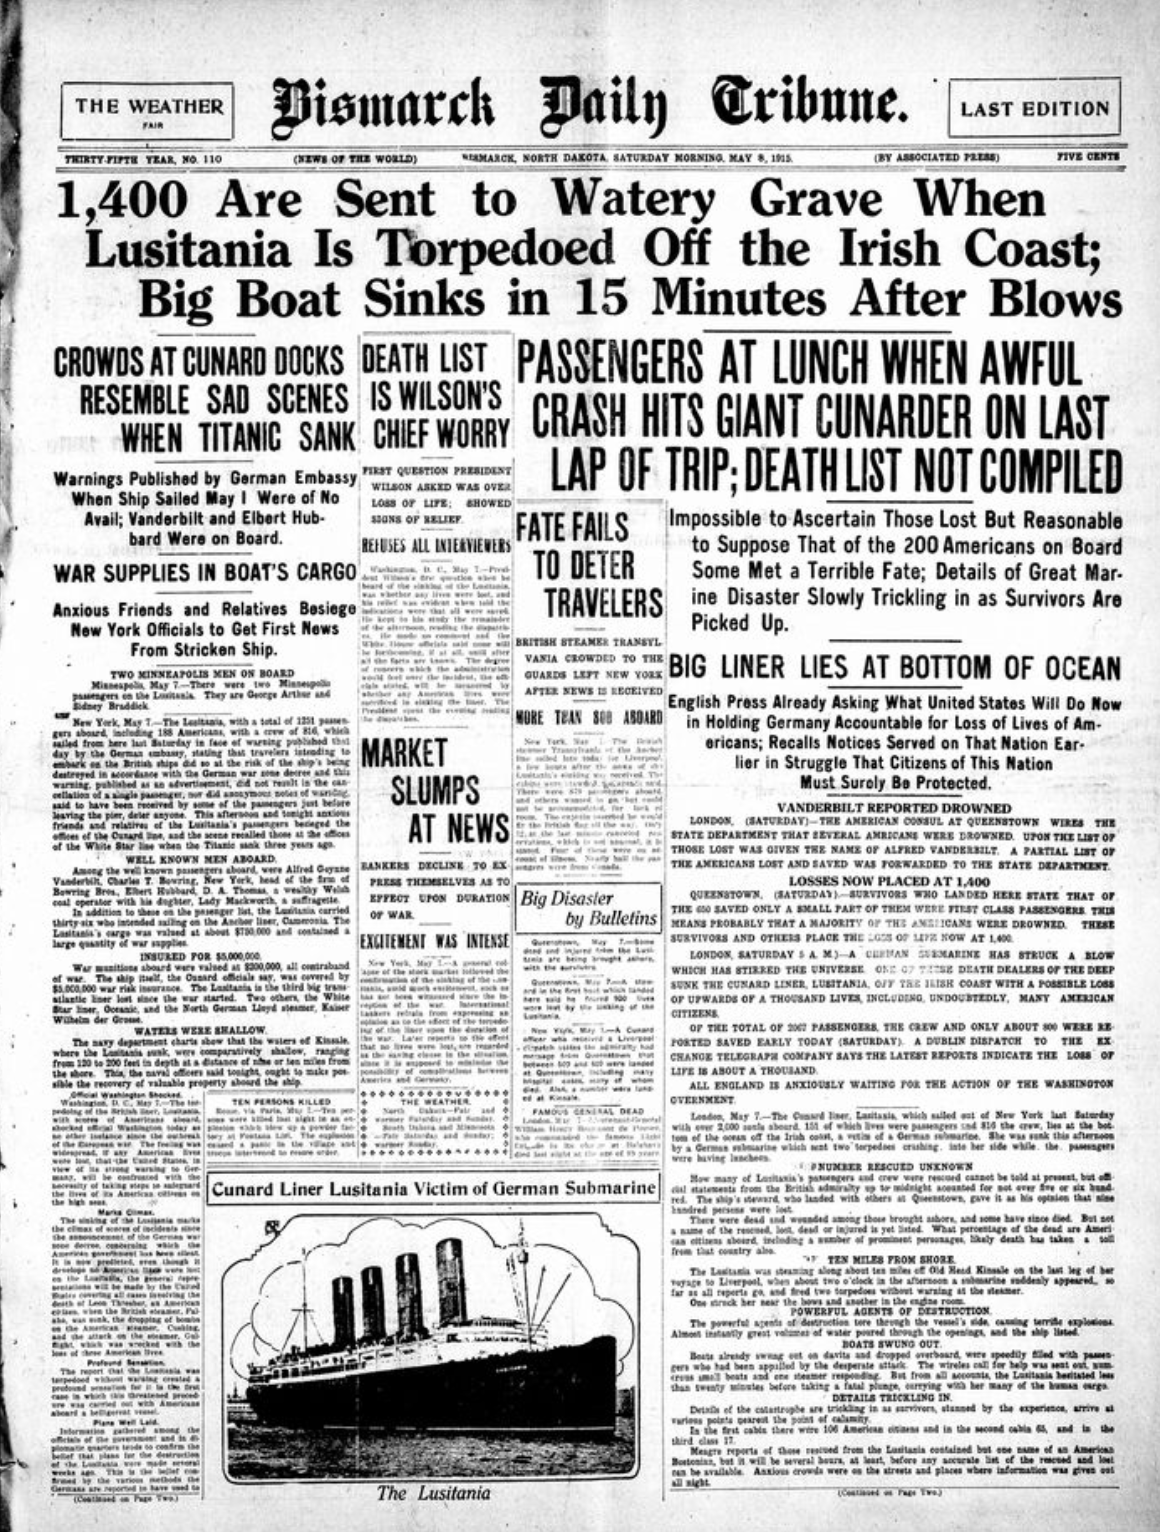  The front page of the  Bismarck Daily Tribune  on the day after the tragedy is an example of hundreds of newspapers across the country were saturated with reporting about  Lusitania  disaster.  